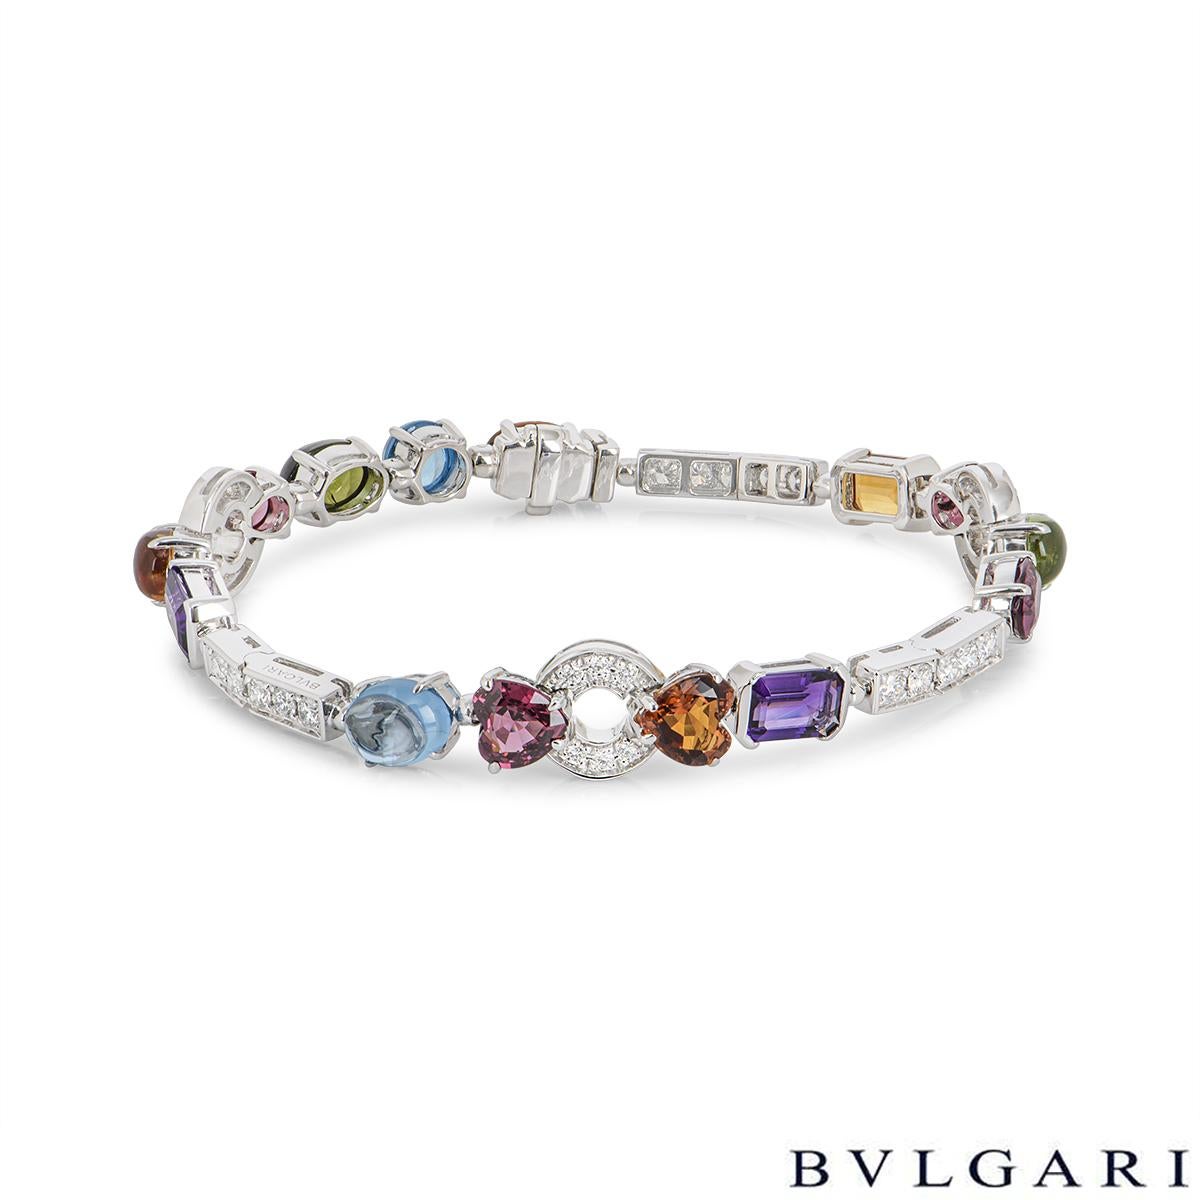 A stunning 18k white gold multi gemstone set Bvlgari bracelet from the Allegra collection. The bracelet is composed of various gemstones of different cuts including, green tourmalines, peridots, amethysts, rhodolite garnets, palmeira citrines, blue